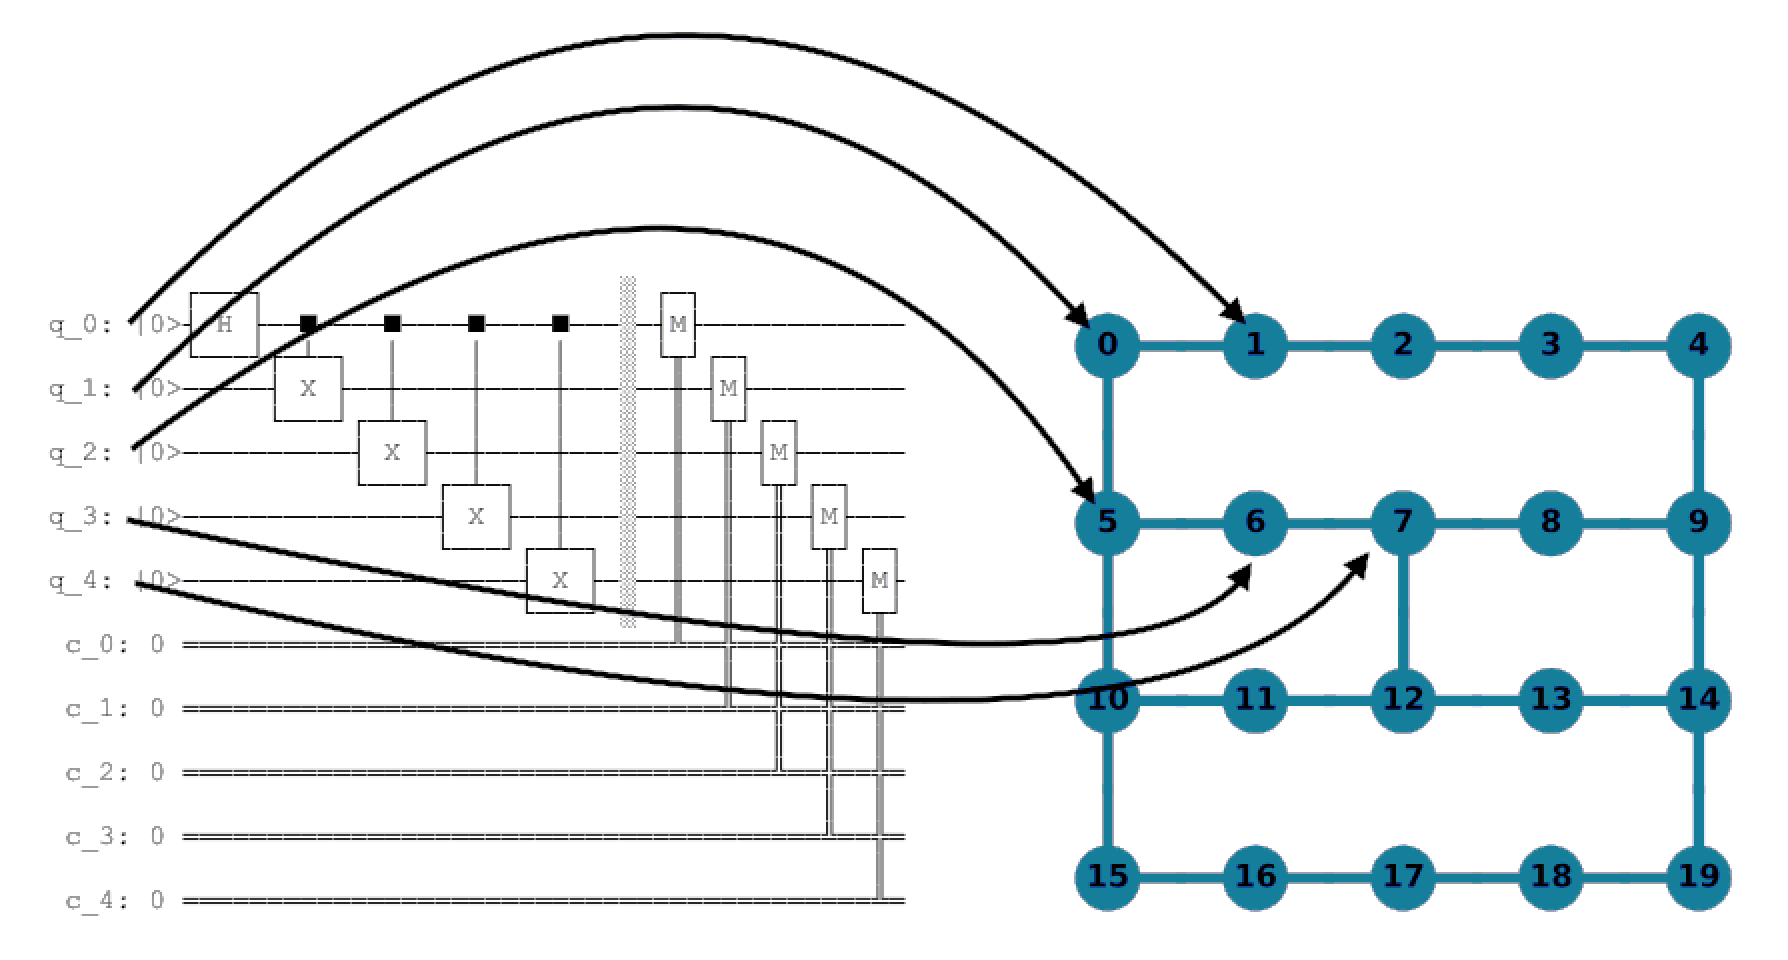 This image illustrates qubits being mapped from the wire representation to a diagram that represents how the qubits are connected on the system.